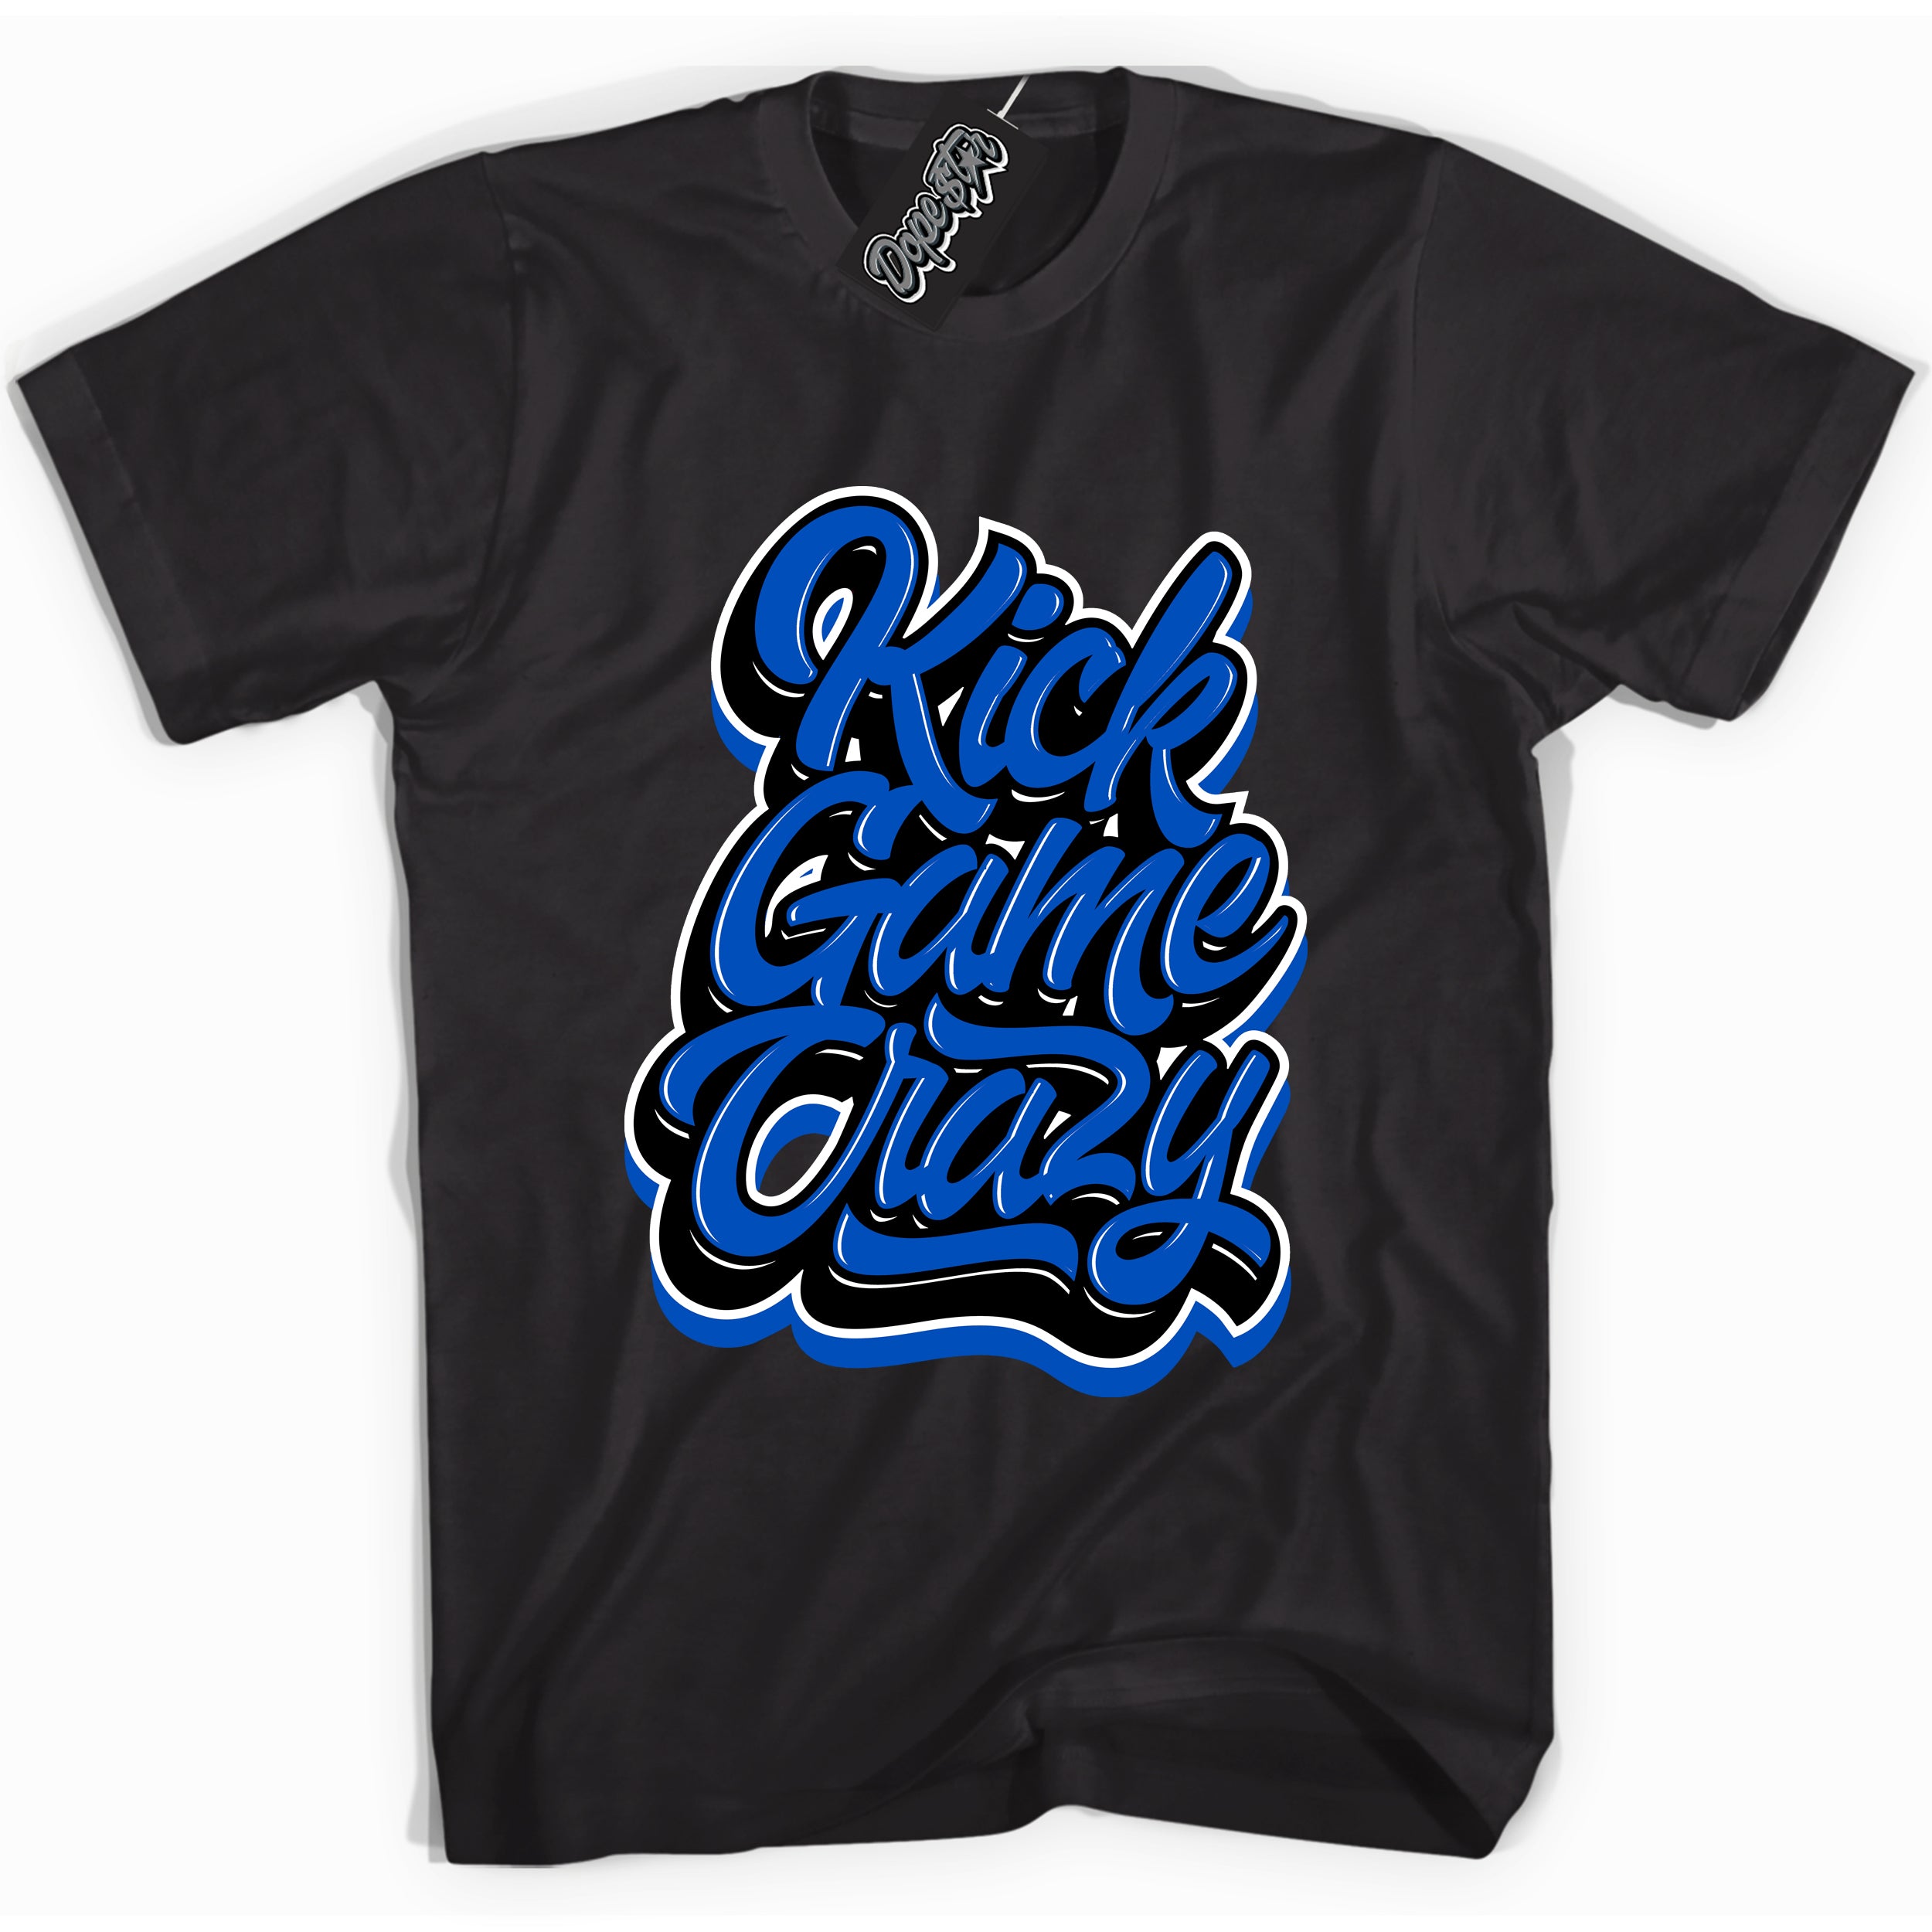 Cool Black graphic tee with "Kick Game Crazy" design, that perfectly matches Royal Reimagined 1s sneakers 